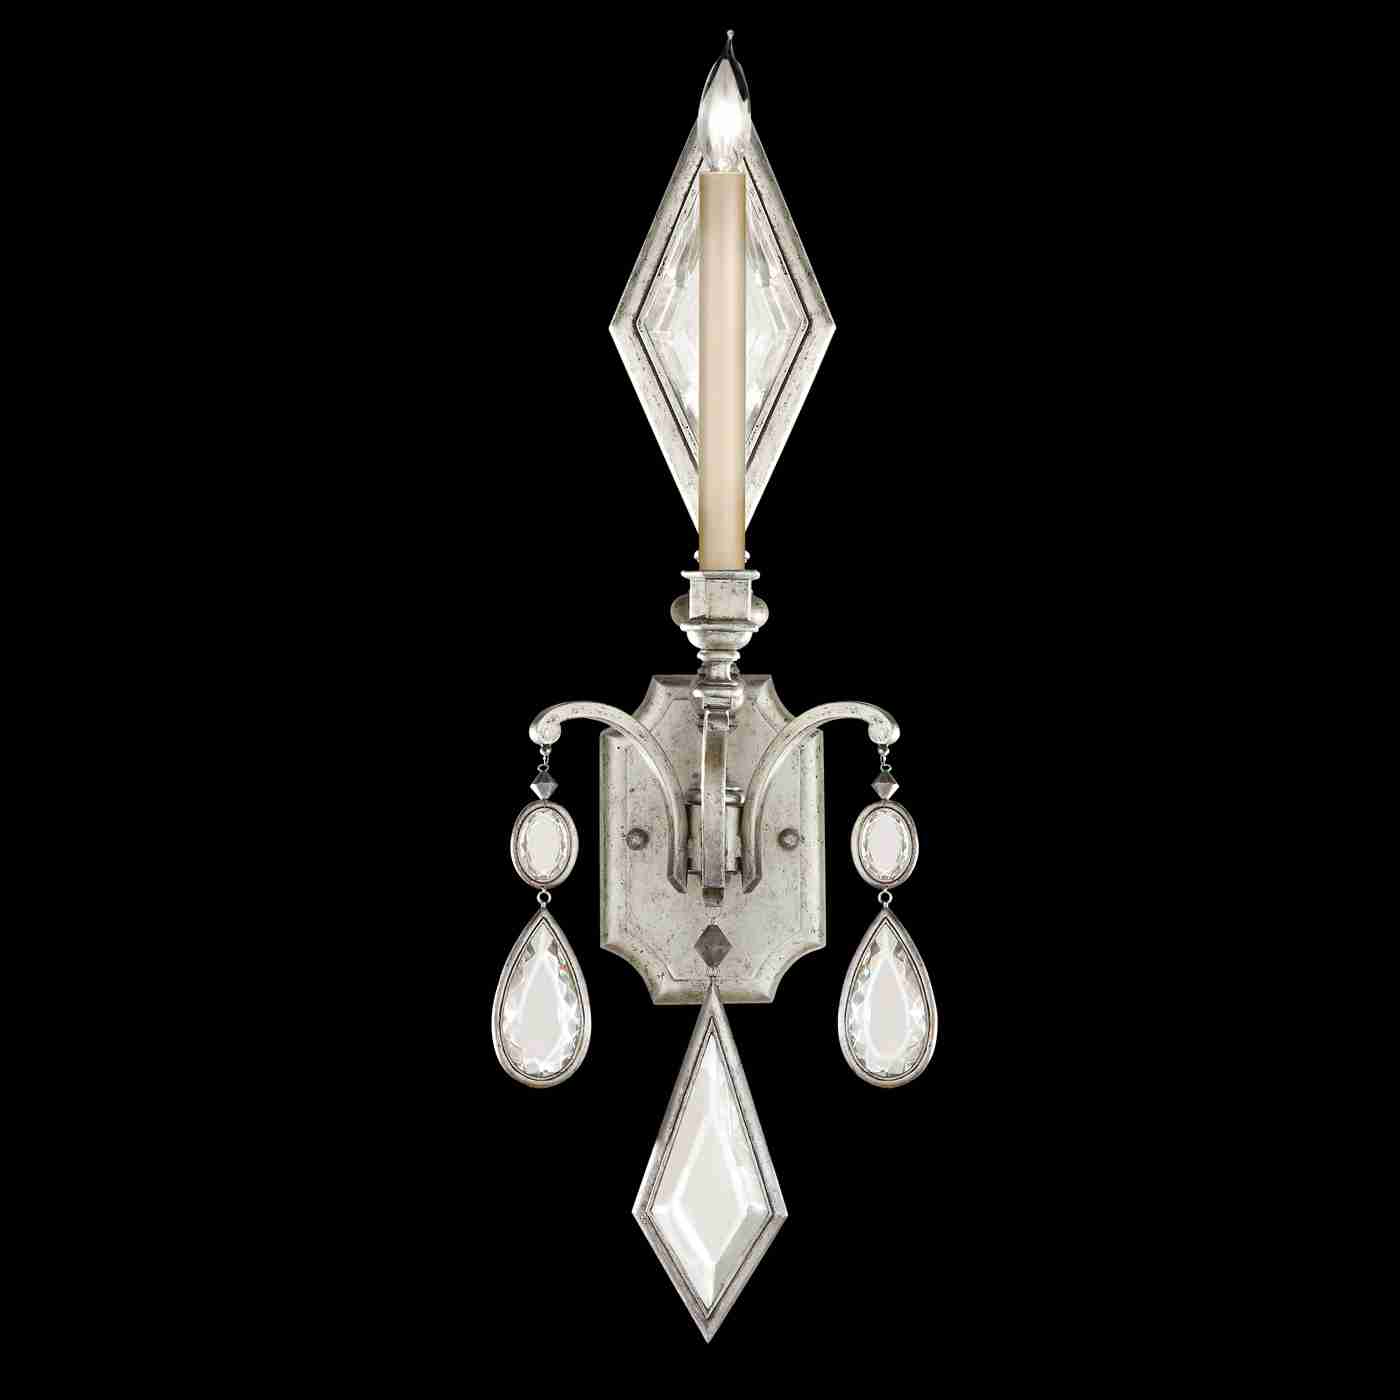 Encased Gems Sconce Silver with Clear Gems